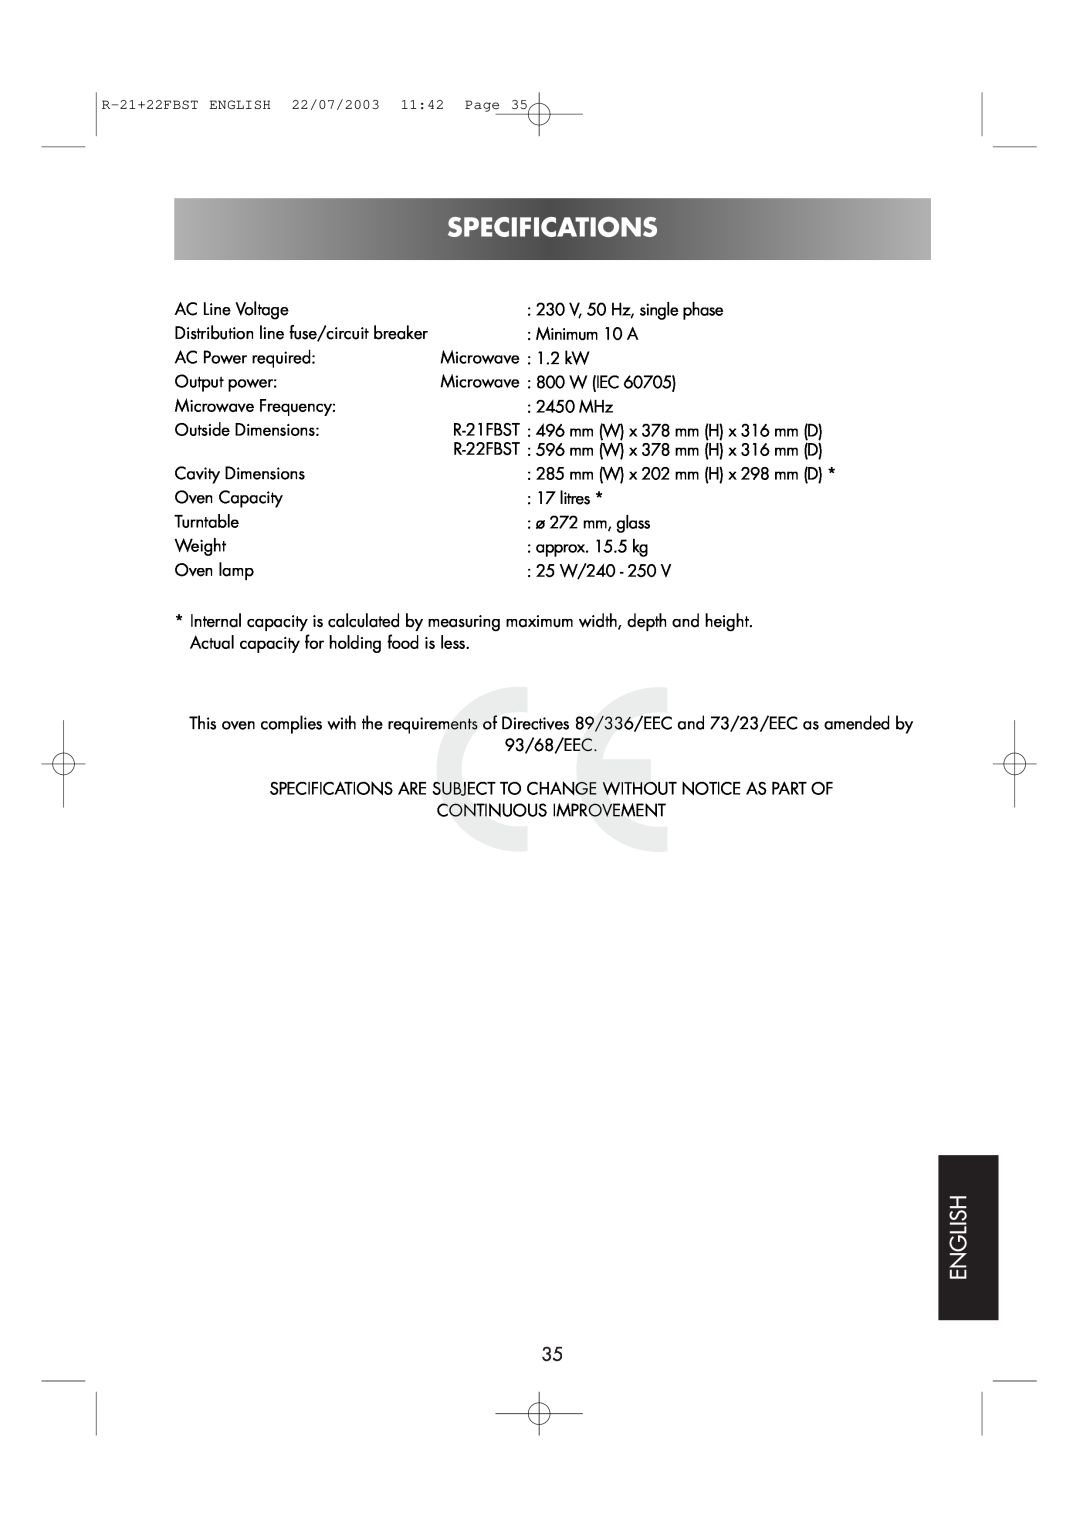 Sharp R-21 FBST, R-22FBST operation manual Specifications, English 